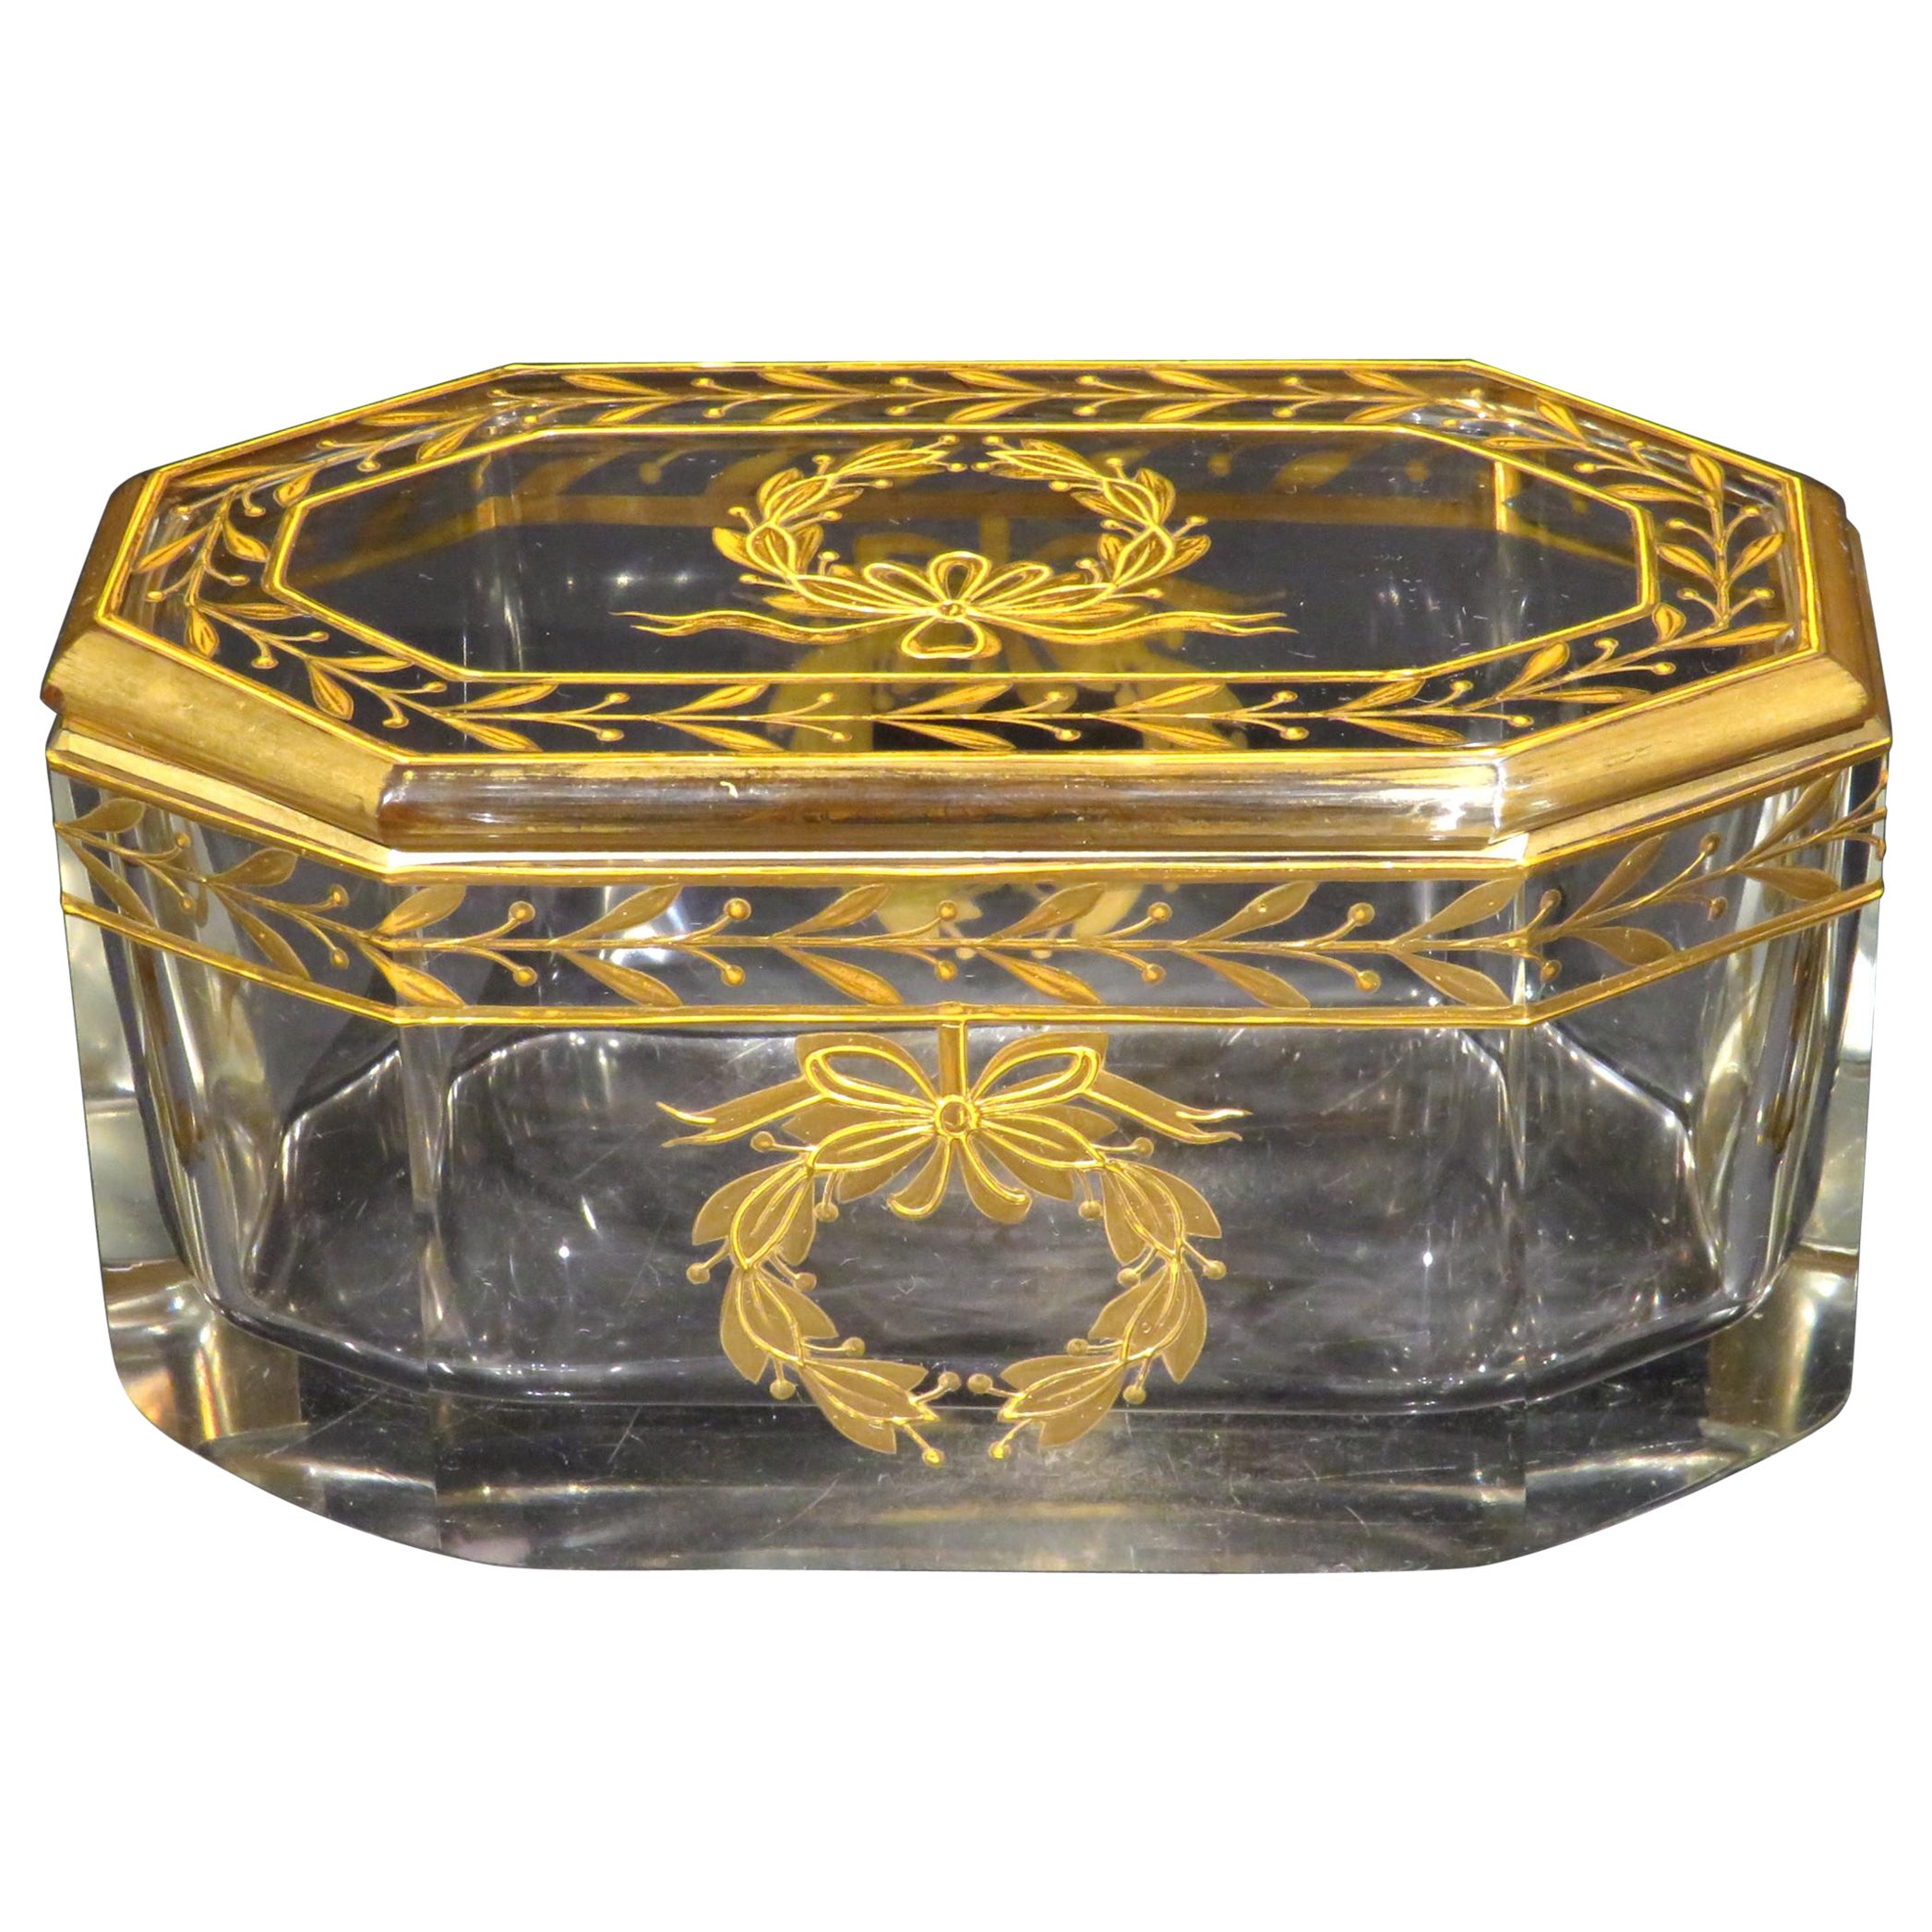 Large Early 20th Century Gilt Decorated Glass Dresser Jar or Box, Circa 1920 For Sale